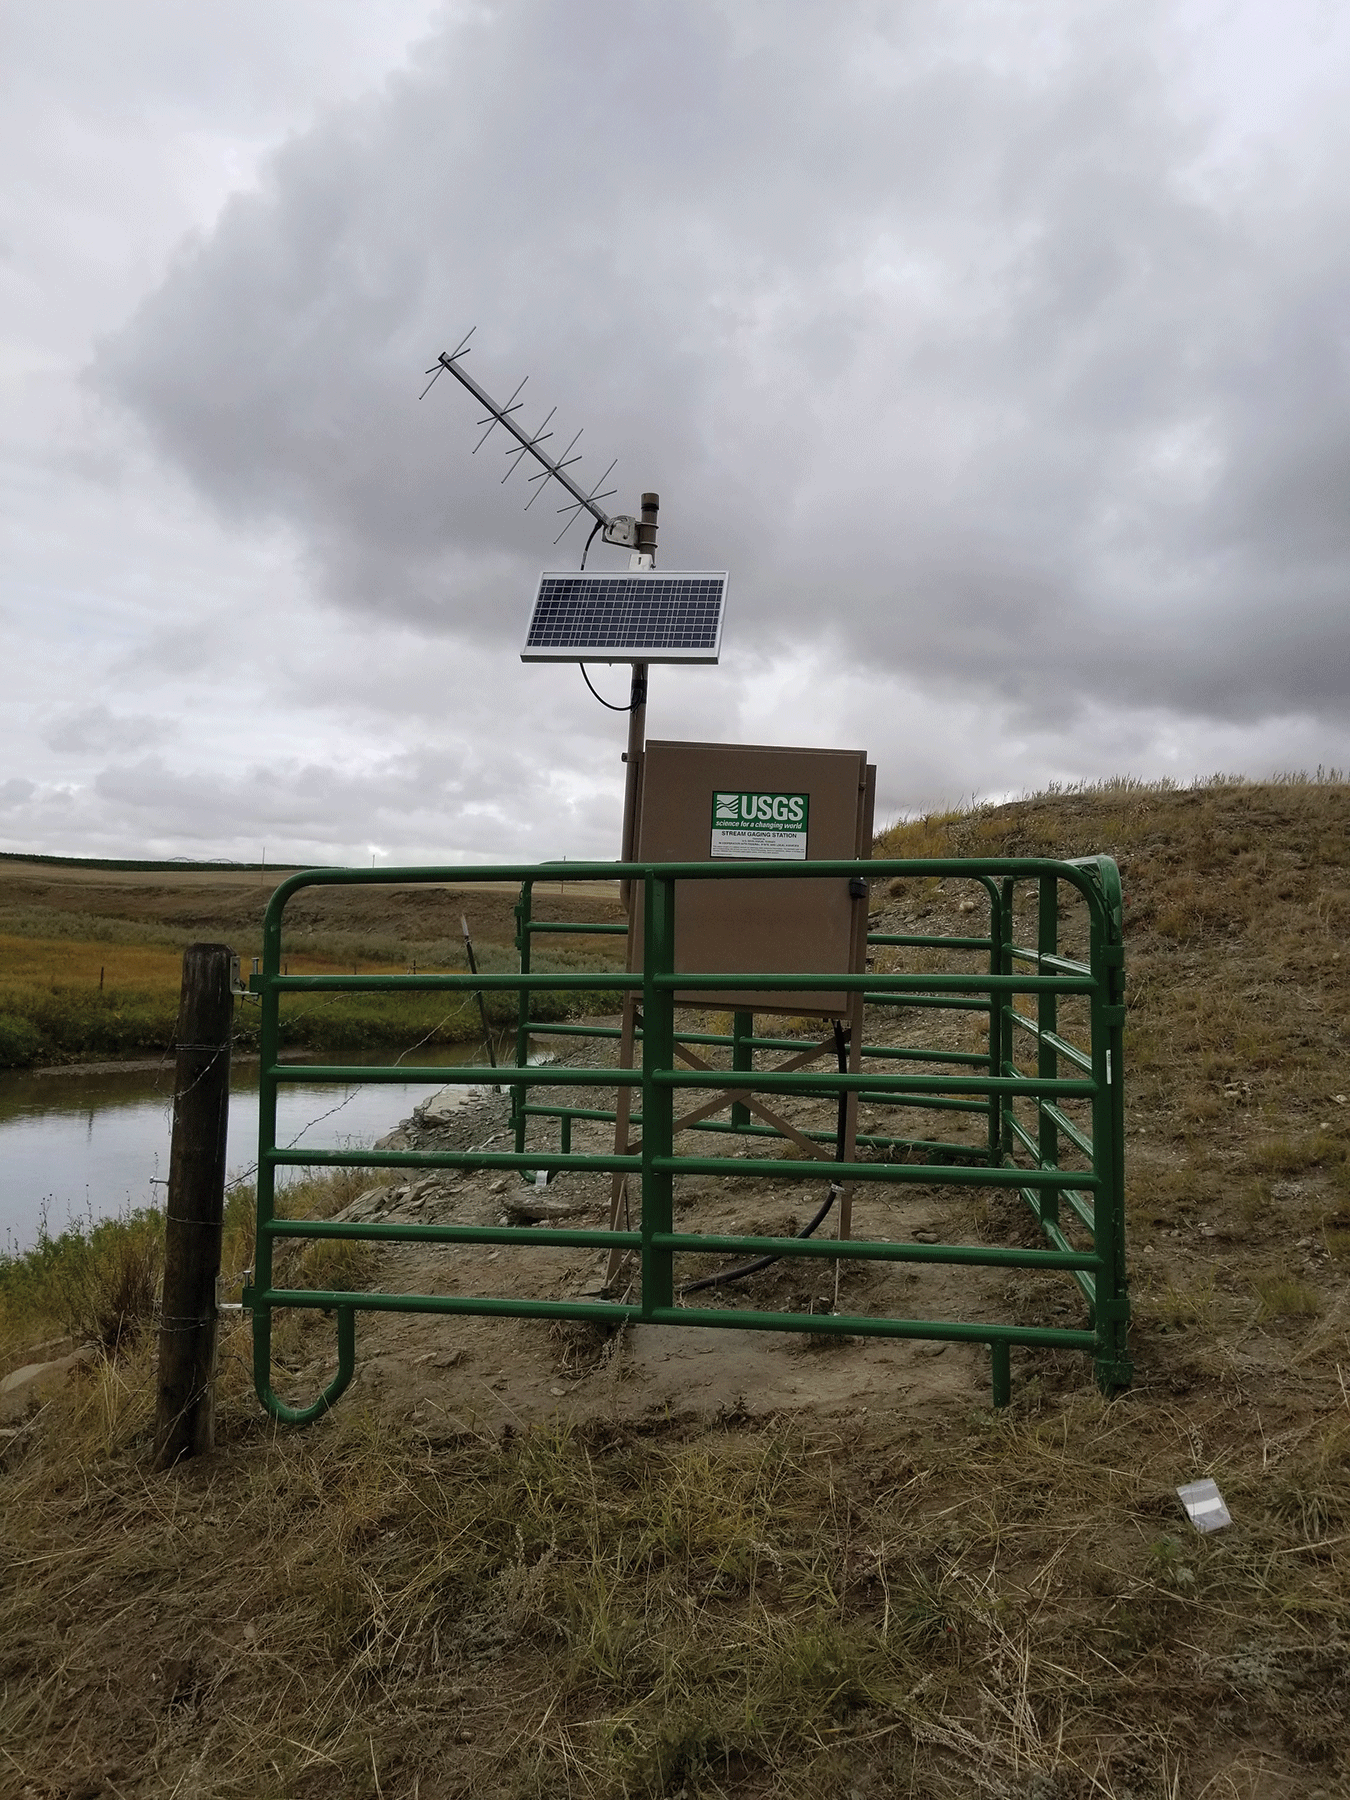 Photograph of streamgages. A, streamgage surrounded by green metal fence next to river.
                     B, same from different angle.